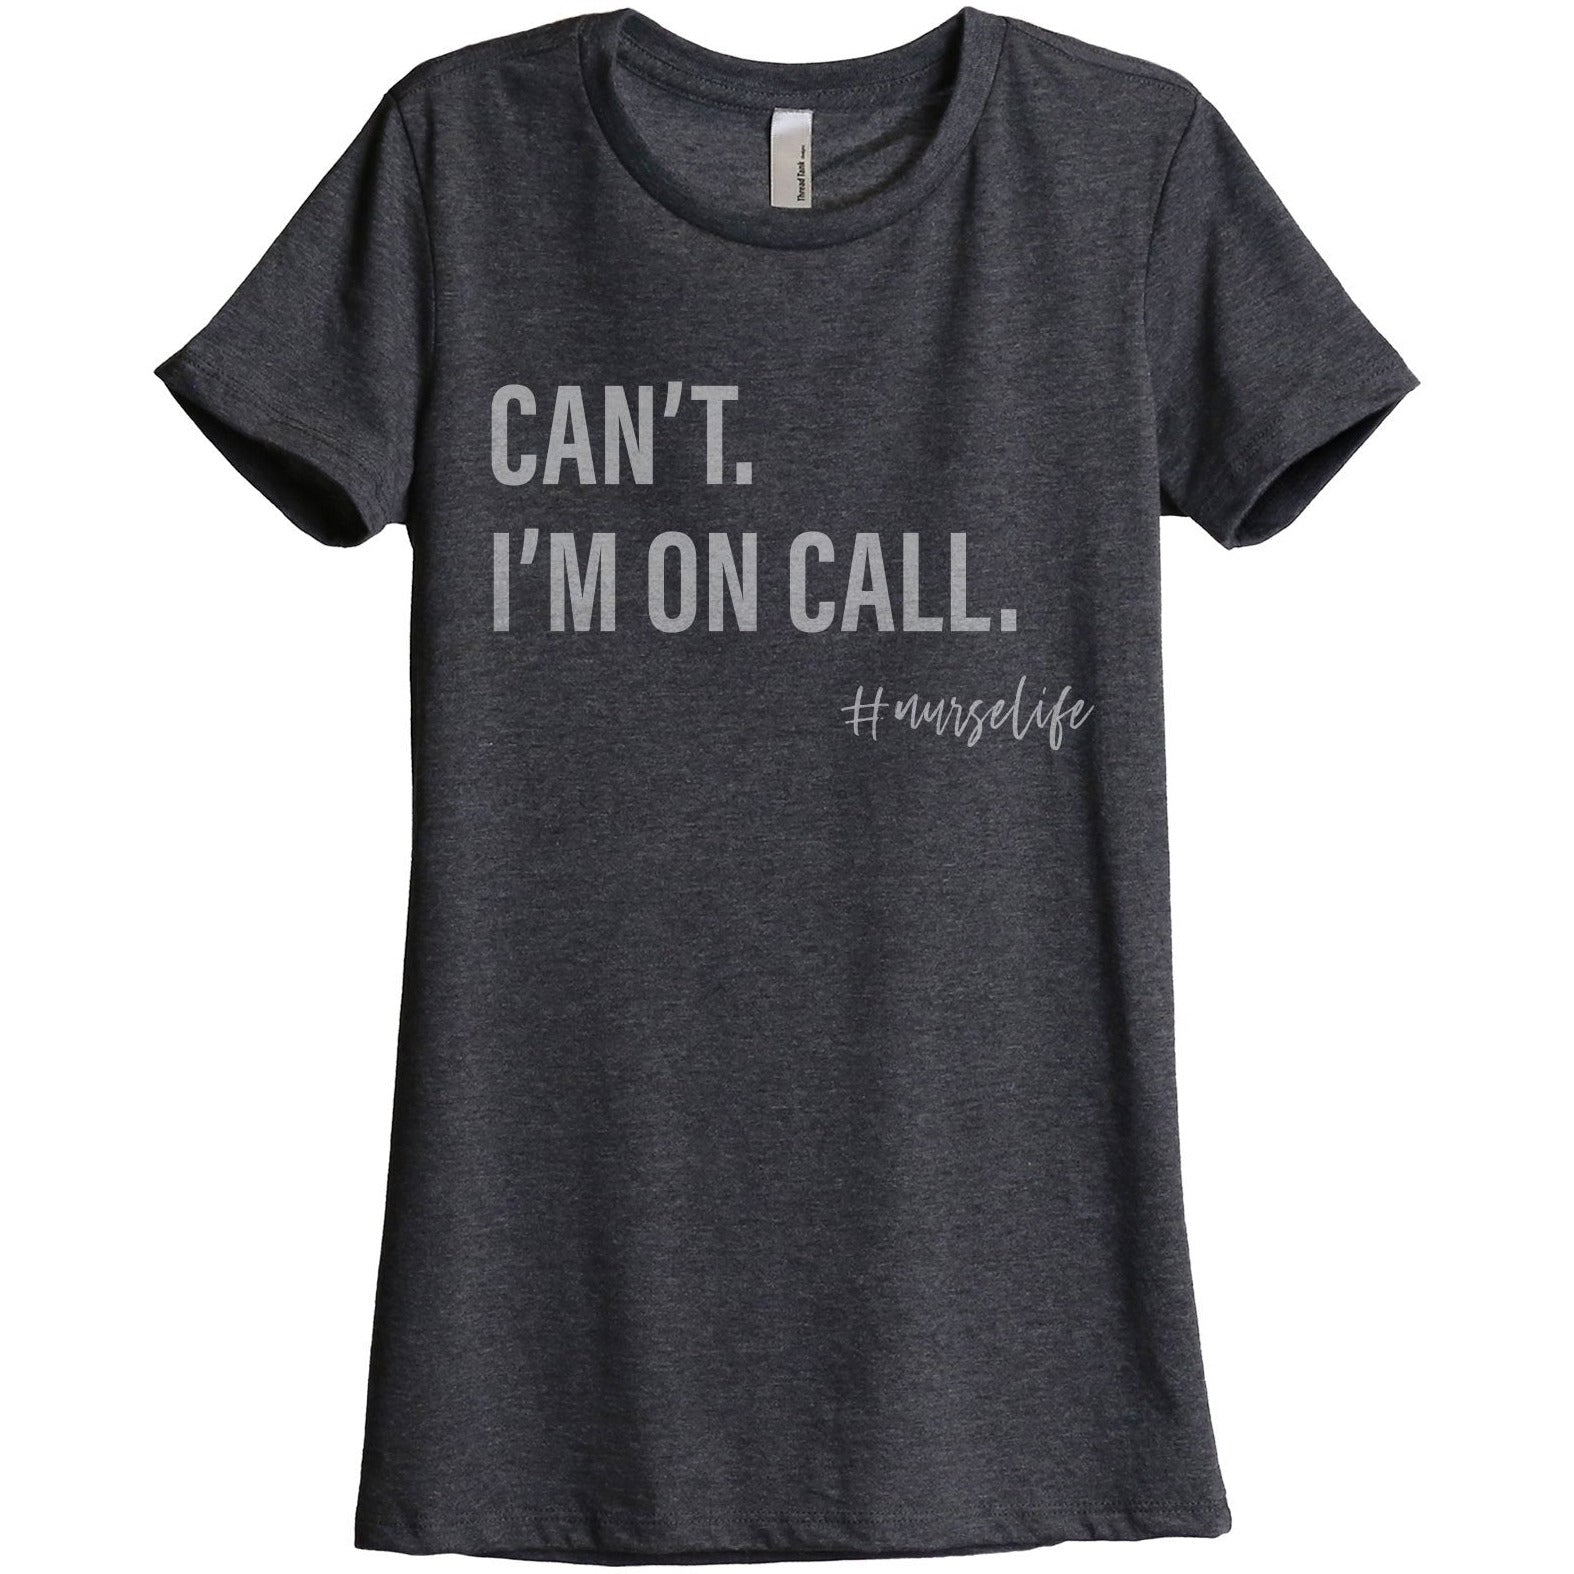 Can't I'm On Call Nurse Life Women's Relaxed Crewneck T-Shirt Top Tee Charcoal Grey
